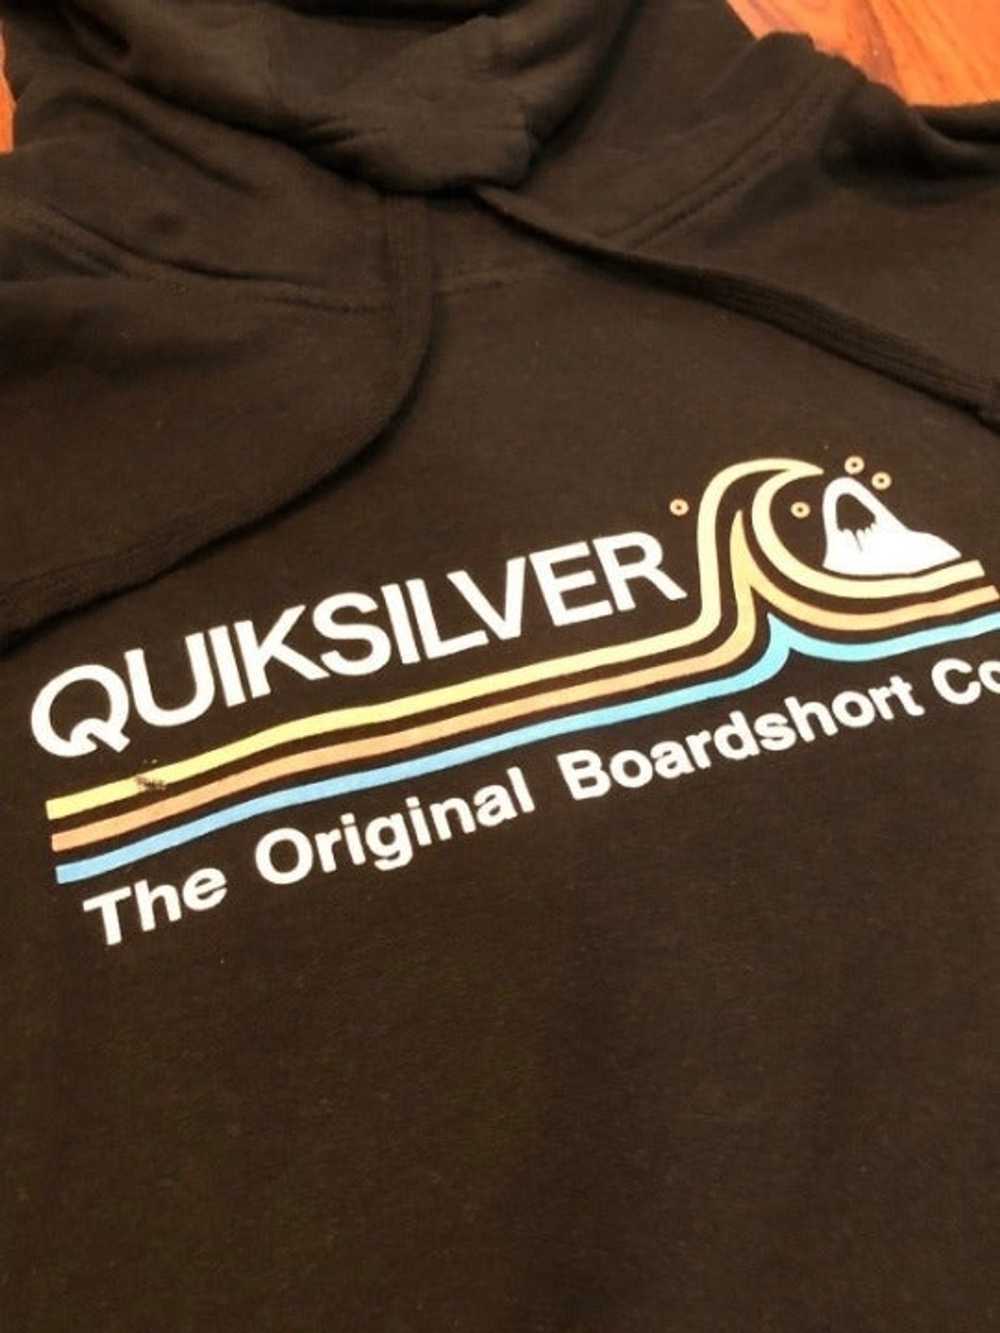 Quiksilver QUIKSILVER STONE COLD CLASSIC HOODIE XL - image 3